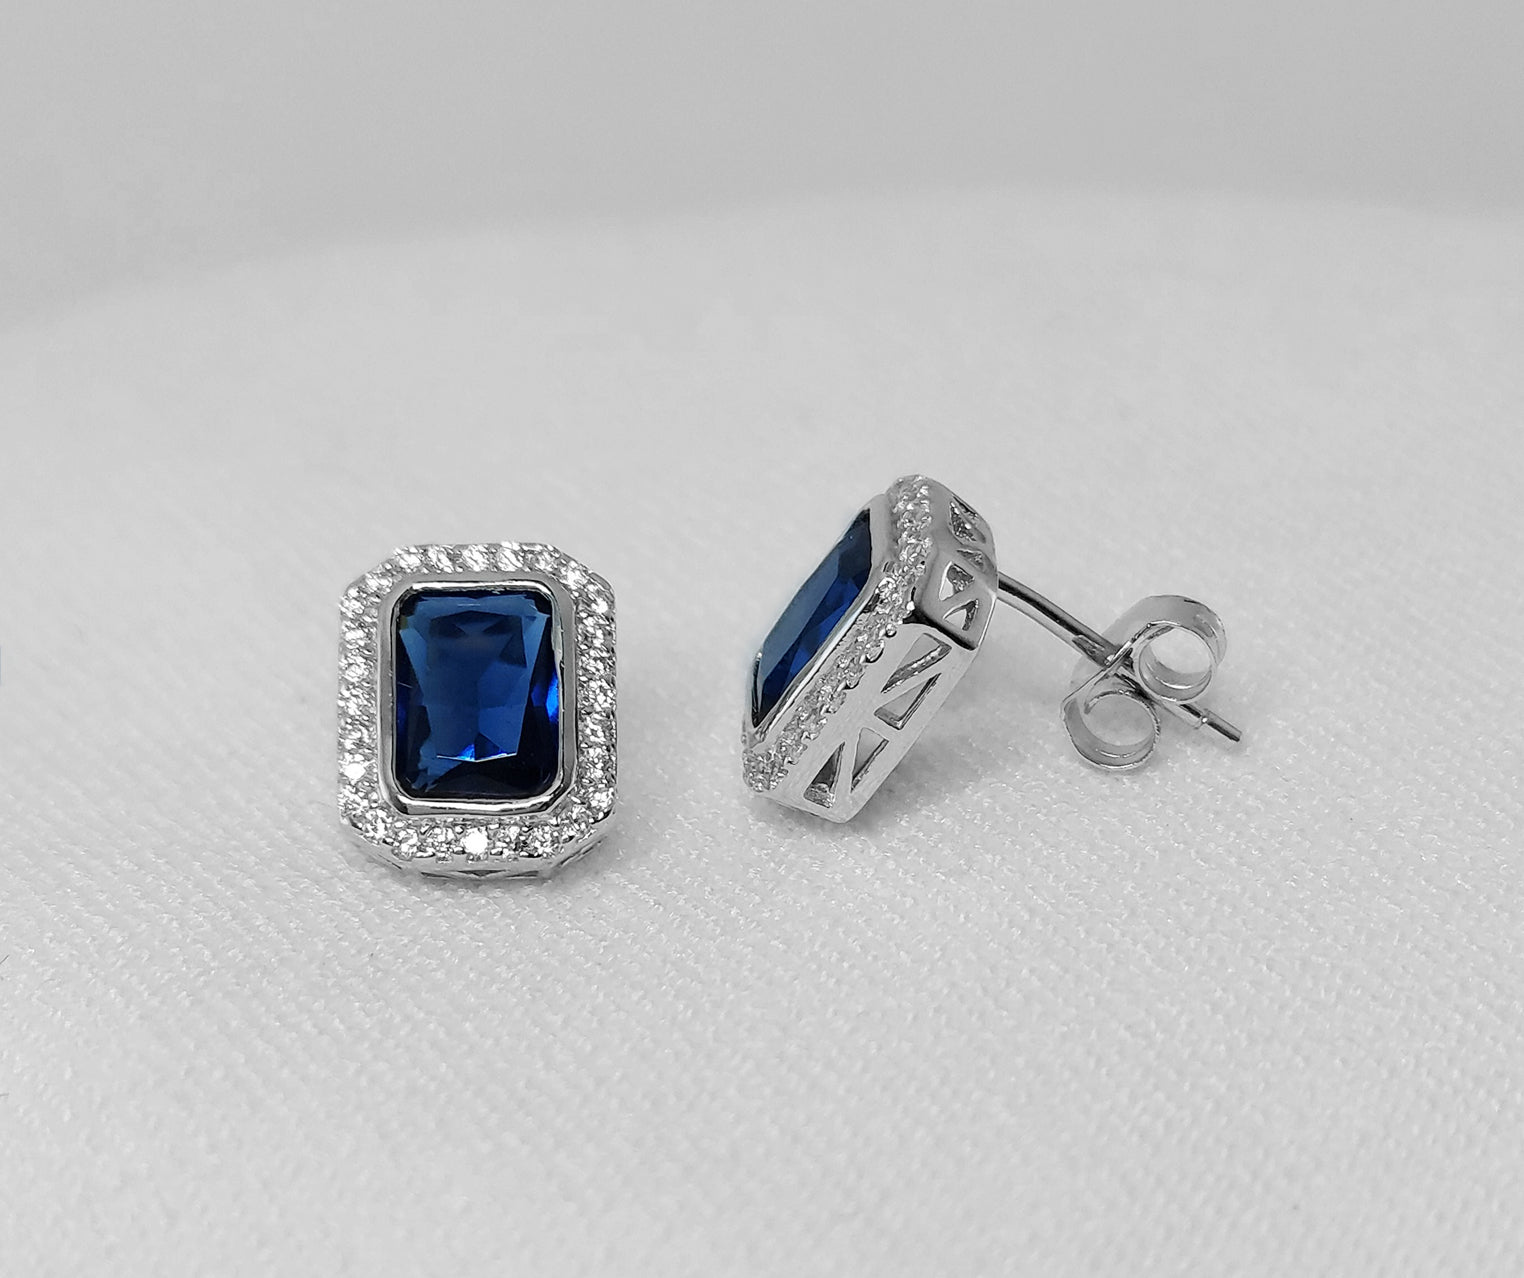 Sterling Silver Rectangular Earrings with a Blue Cubic Zirconia Stone